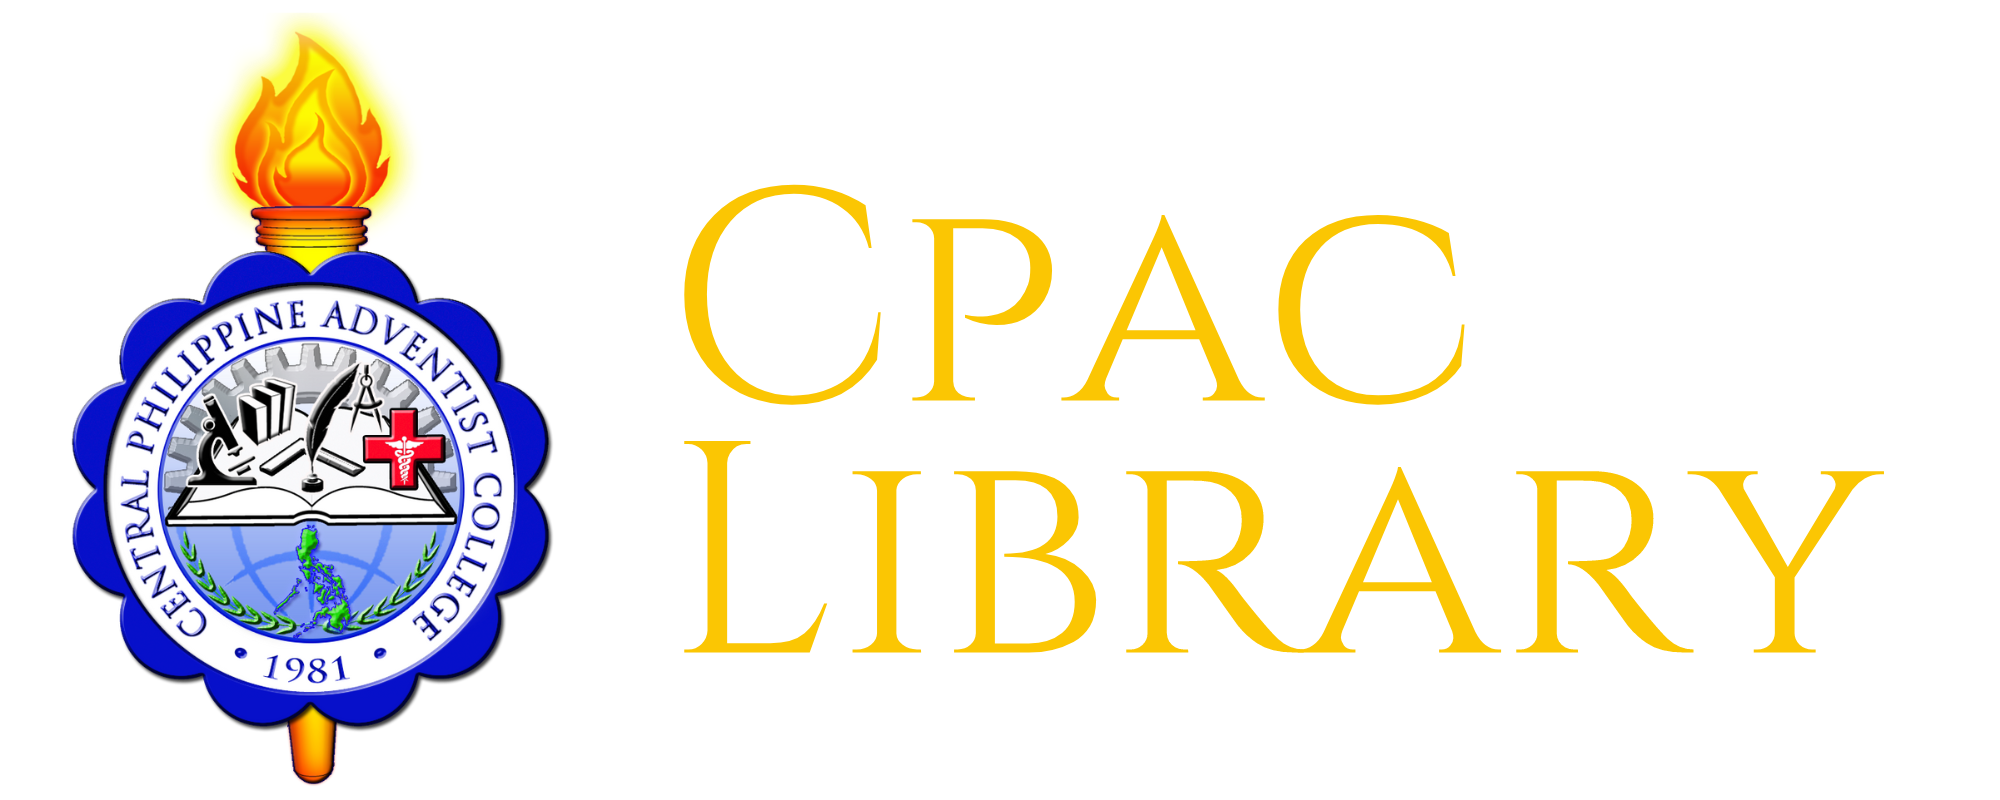 CPAC Library Services